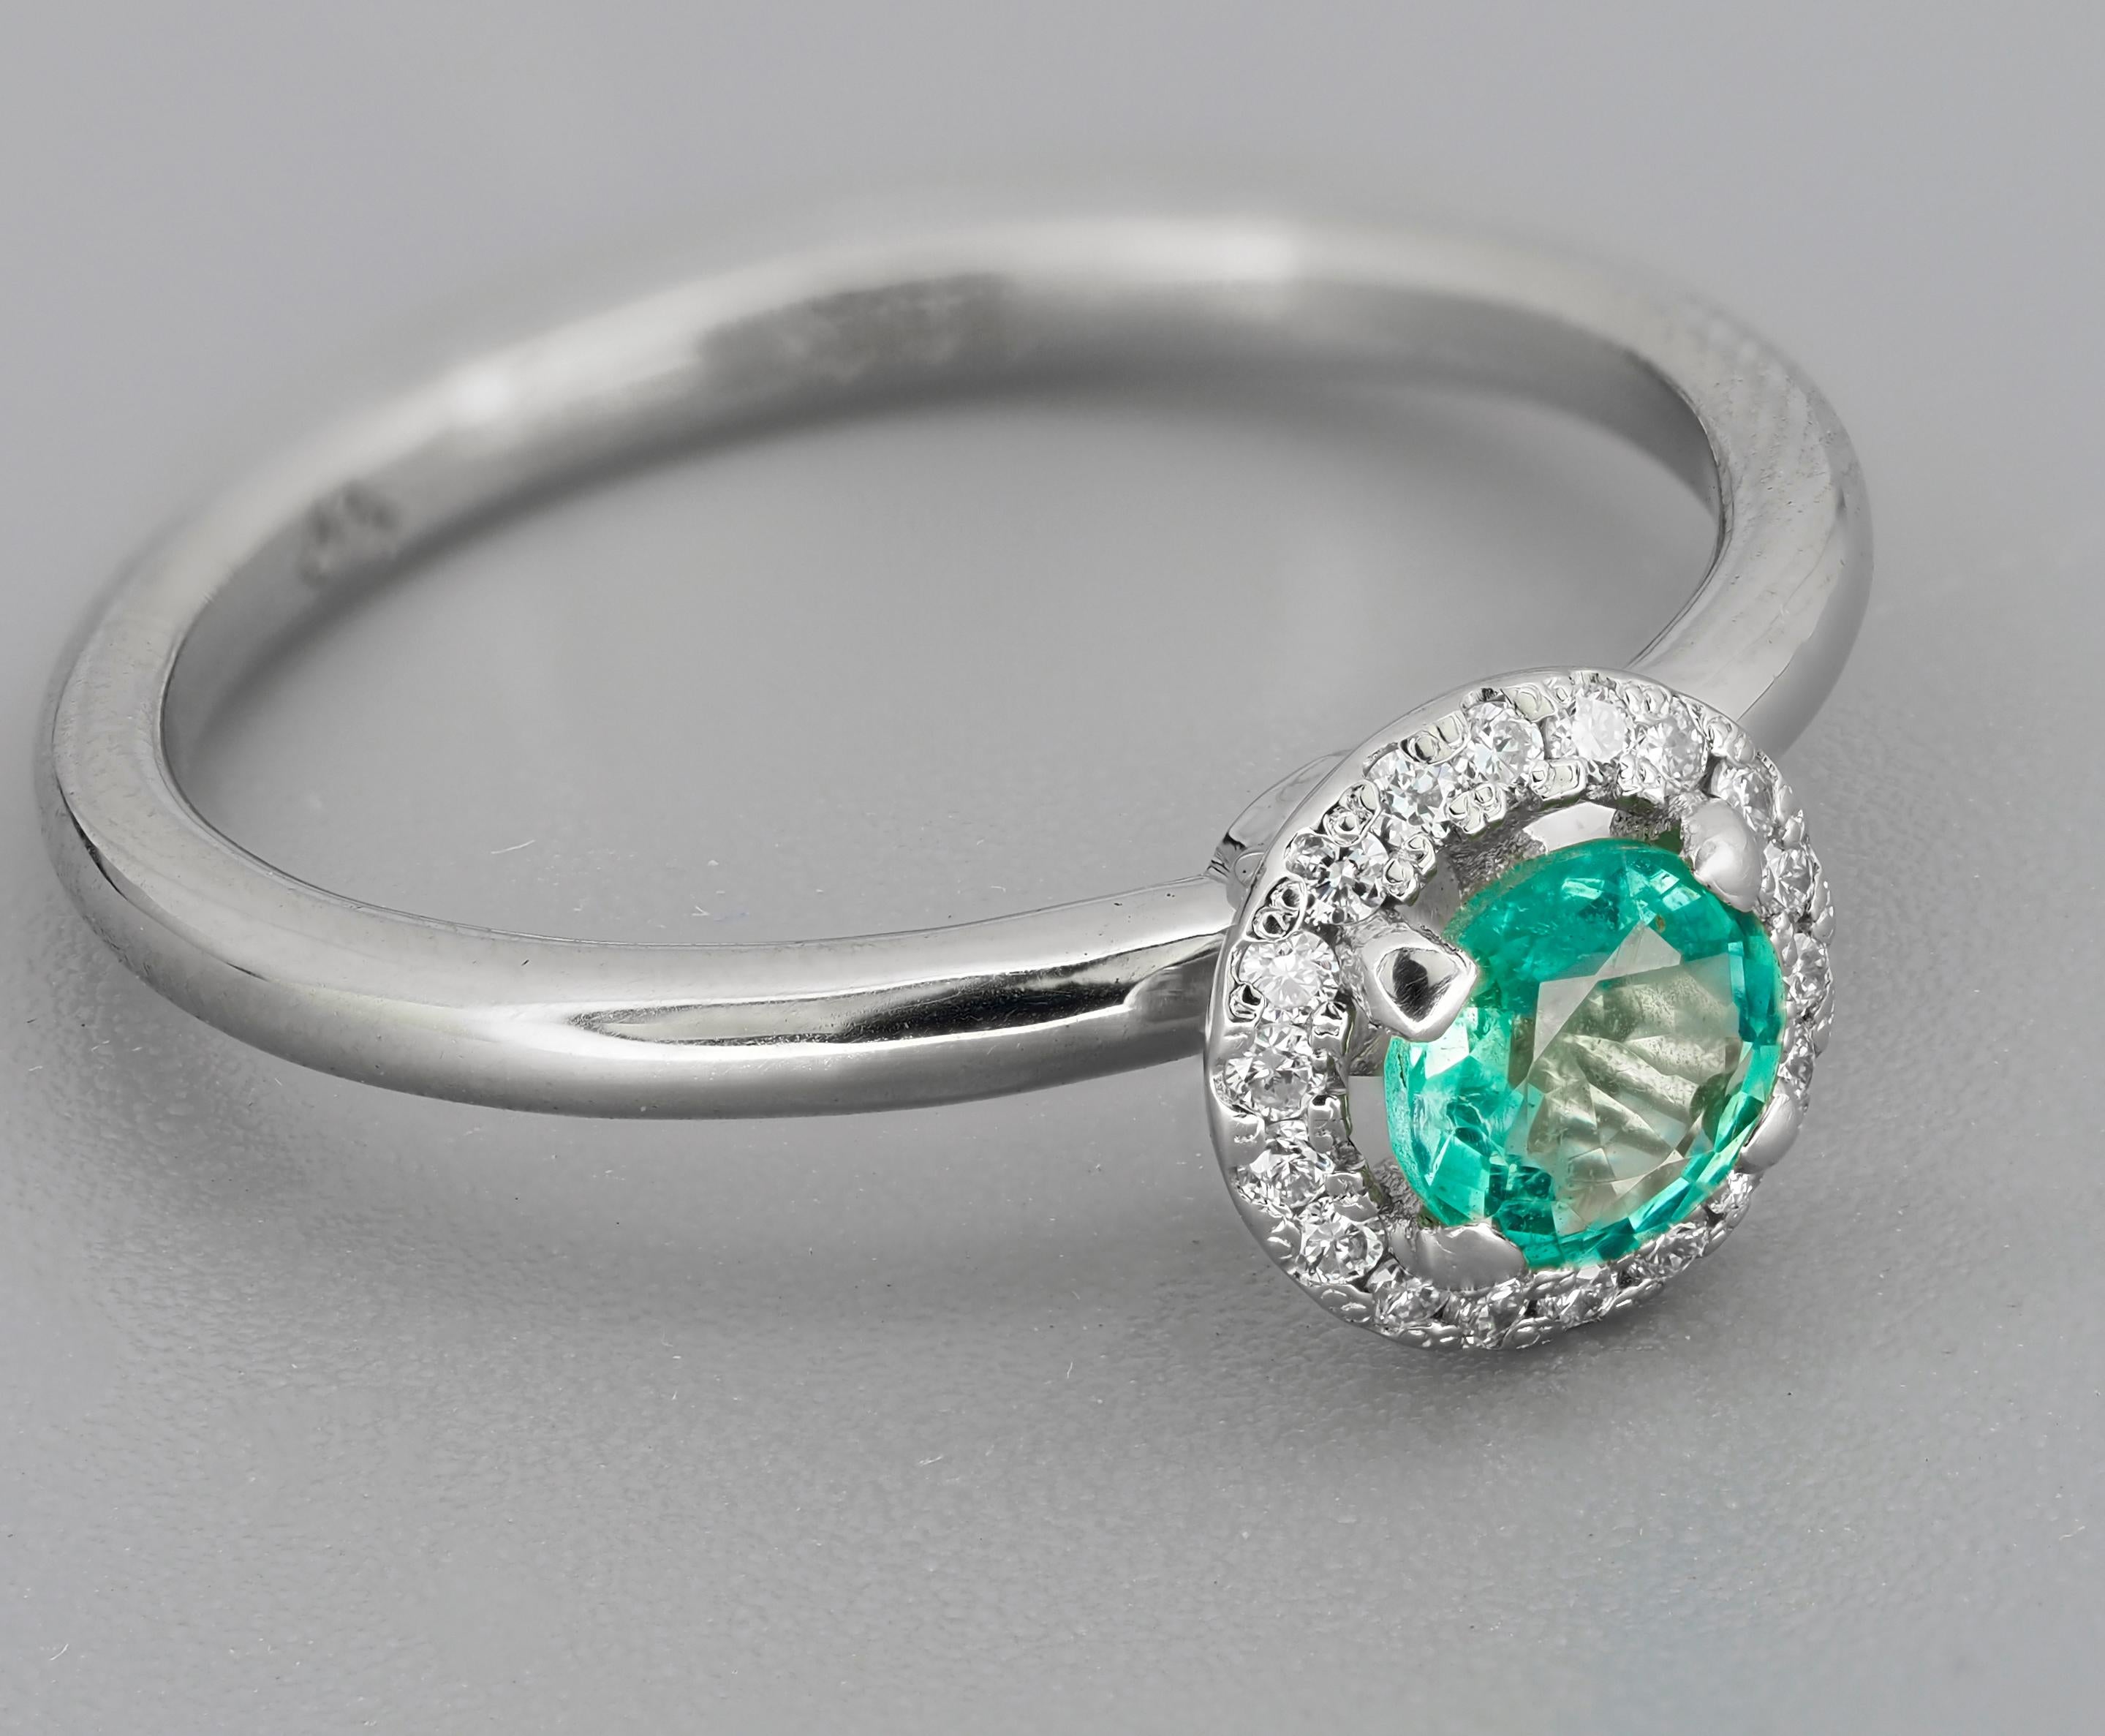 Round Cut 14k Gold Ring with Emerald and Diamonds, Emerald Halo Ring